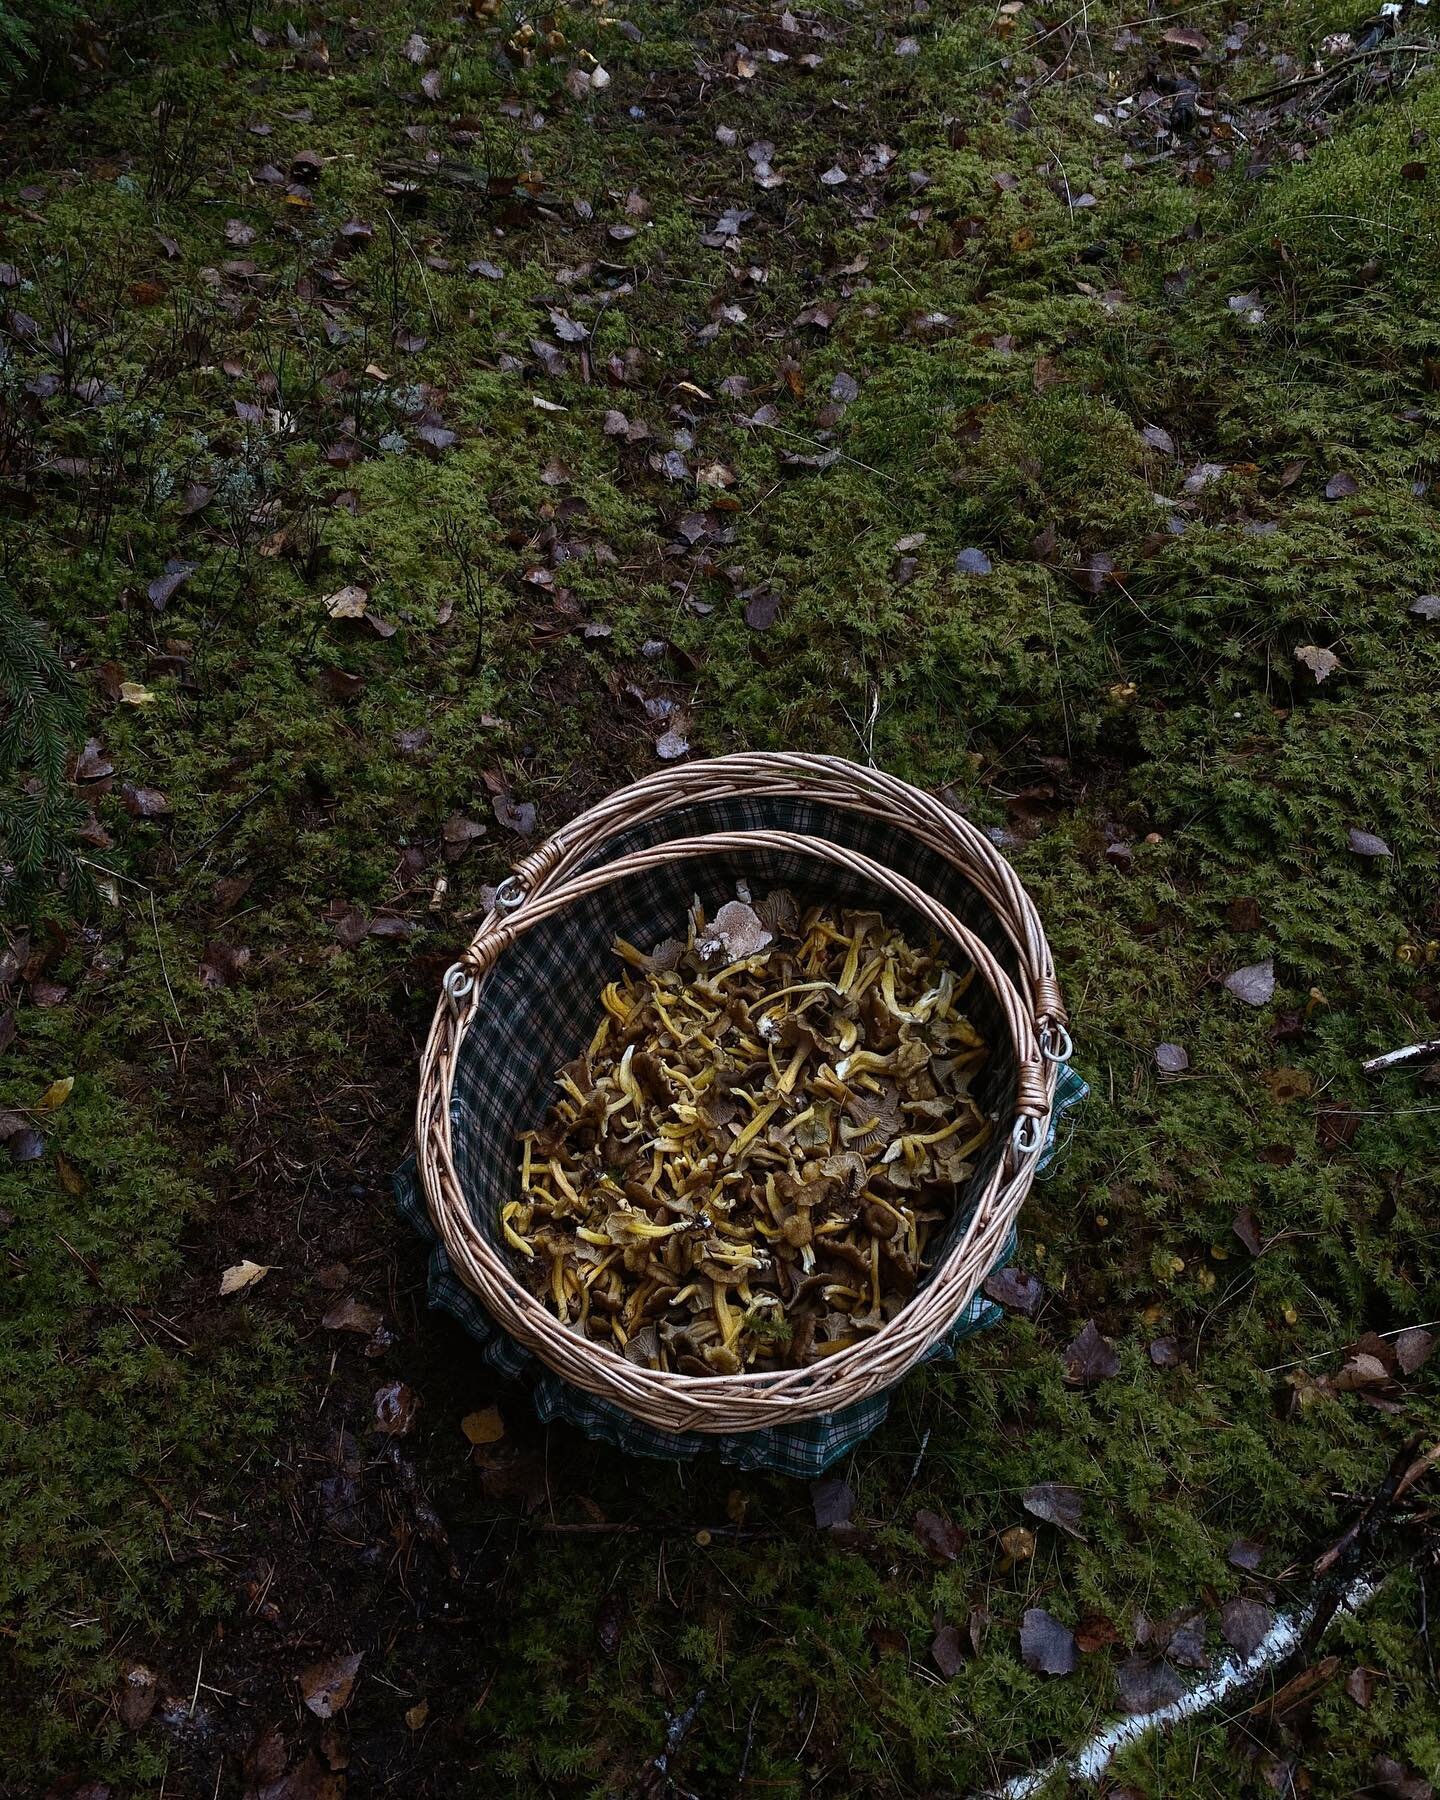 Nothing says fall in Sweden like a basket full of freshly picked mushrooms. We spent the weekend in Gnesta at the border of Stockholm County In foraging for fall chanterelles.